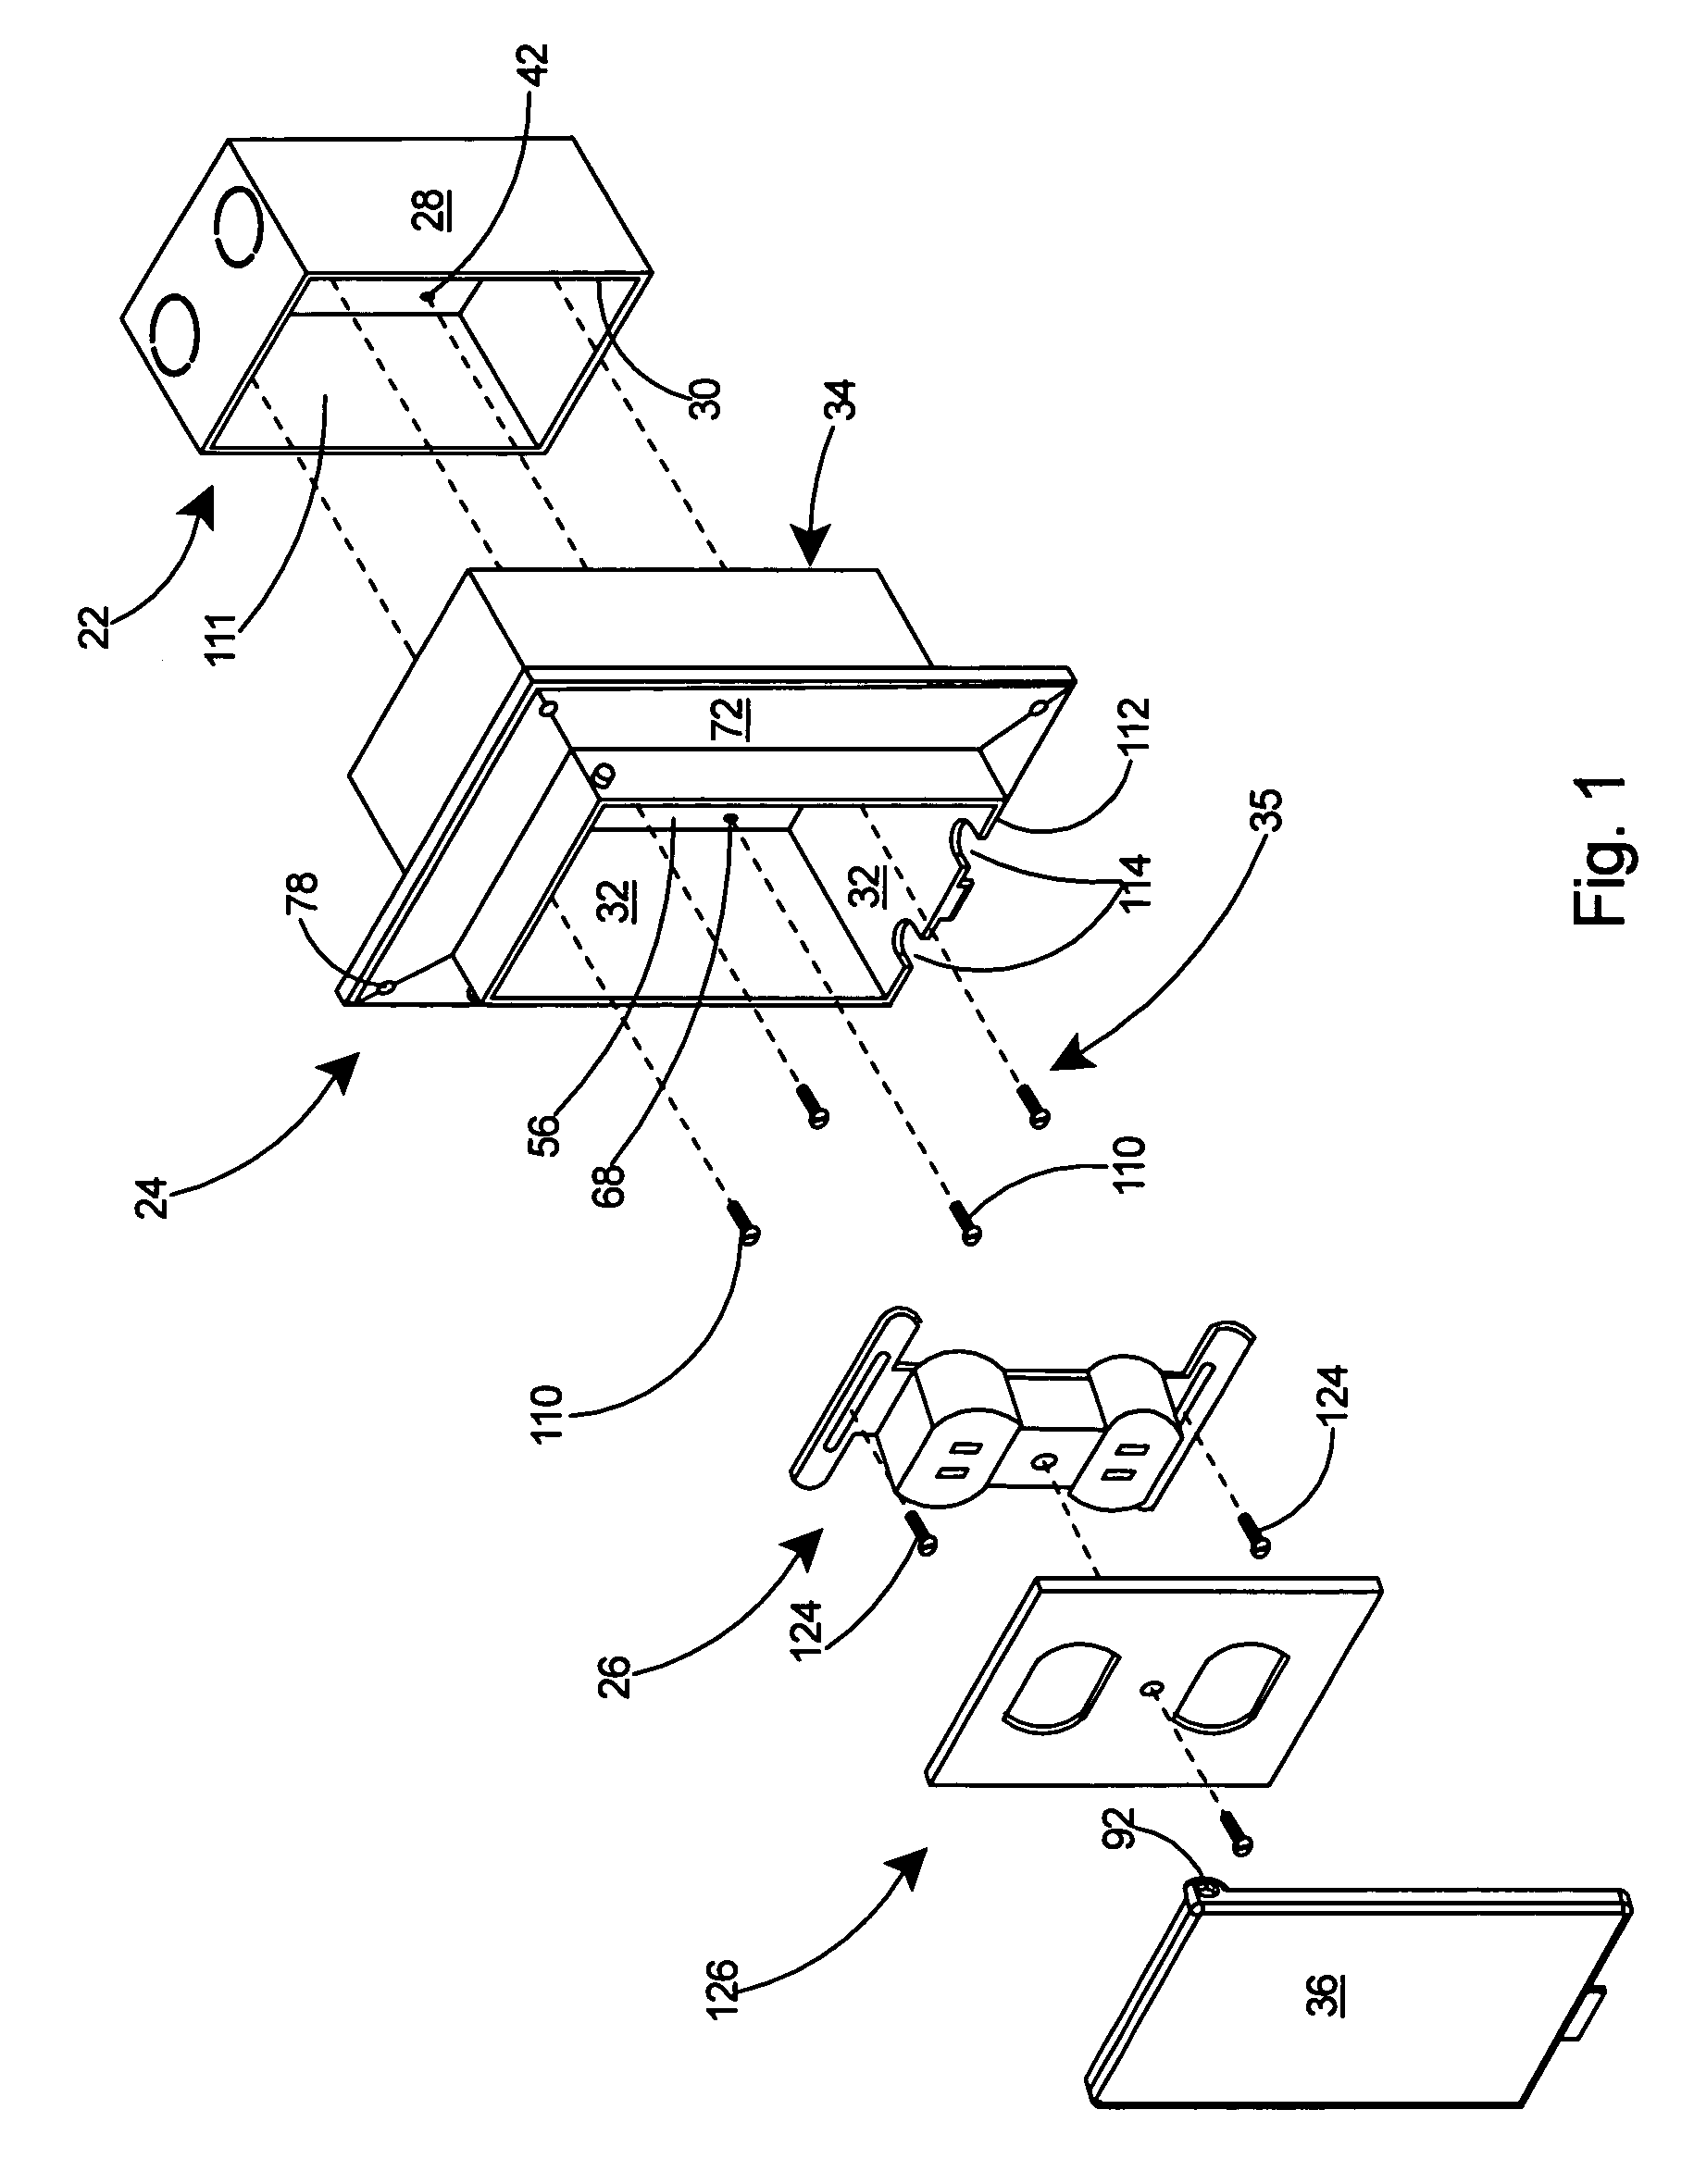 Electrical box assembly for recessing an electrical device